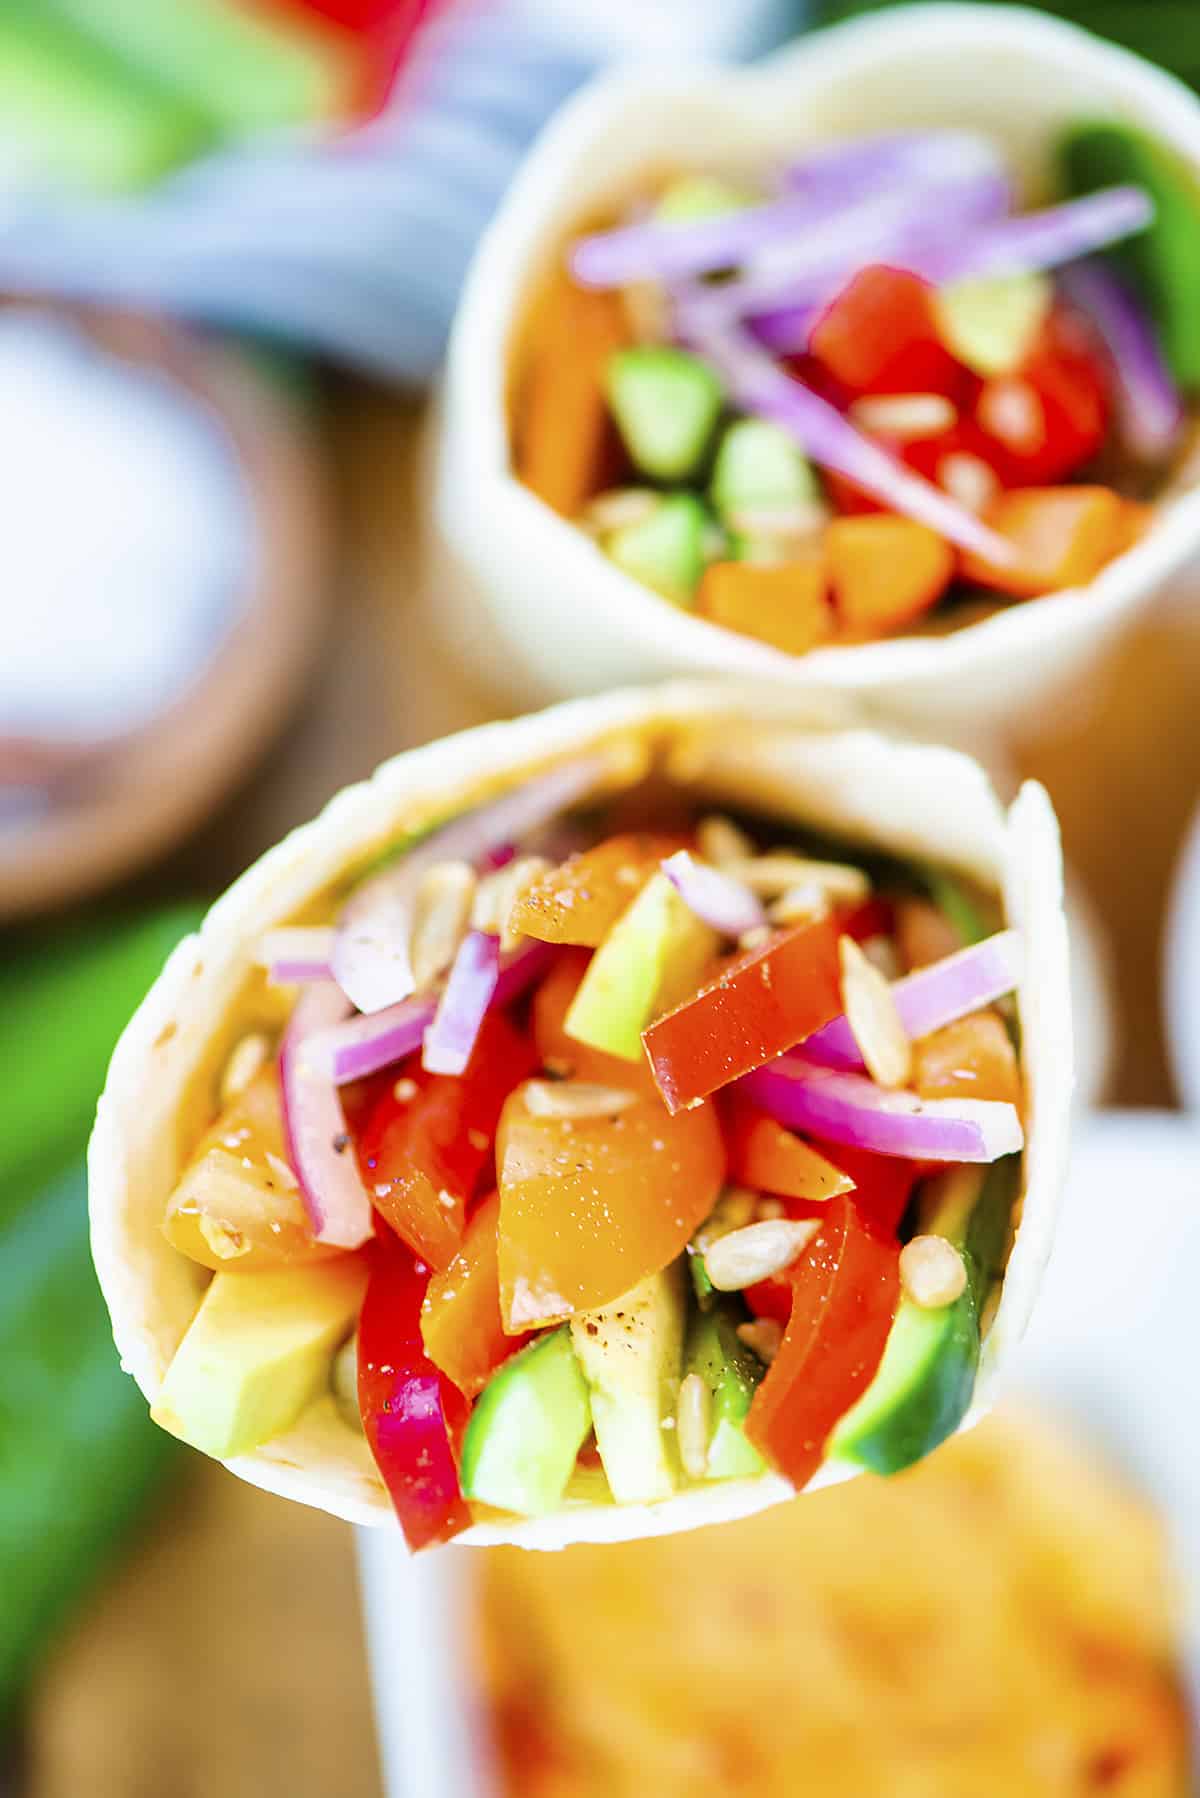 Hummus wraps filled with vegetables.